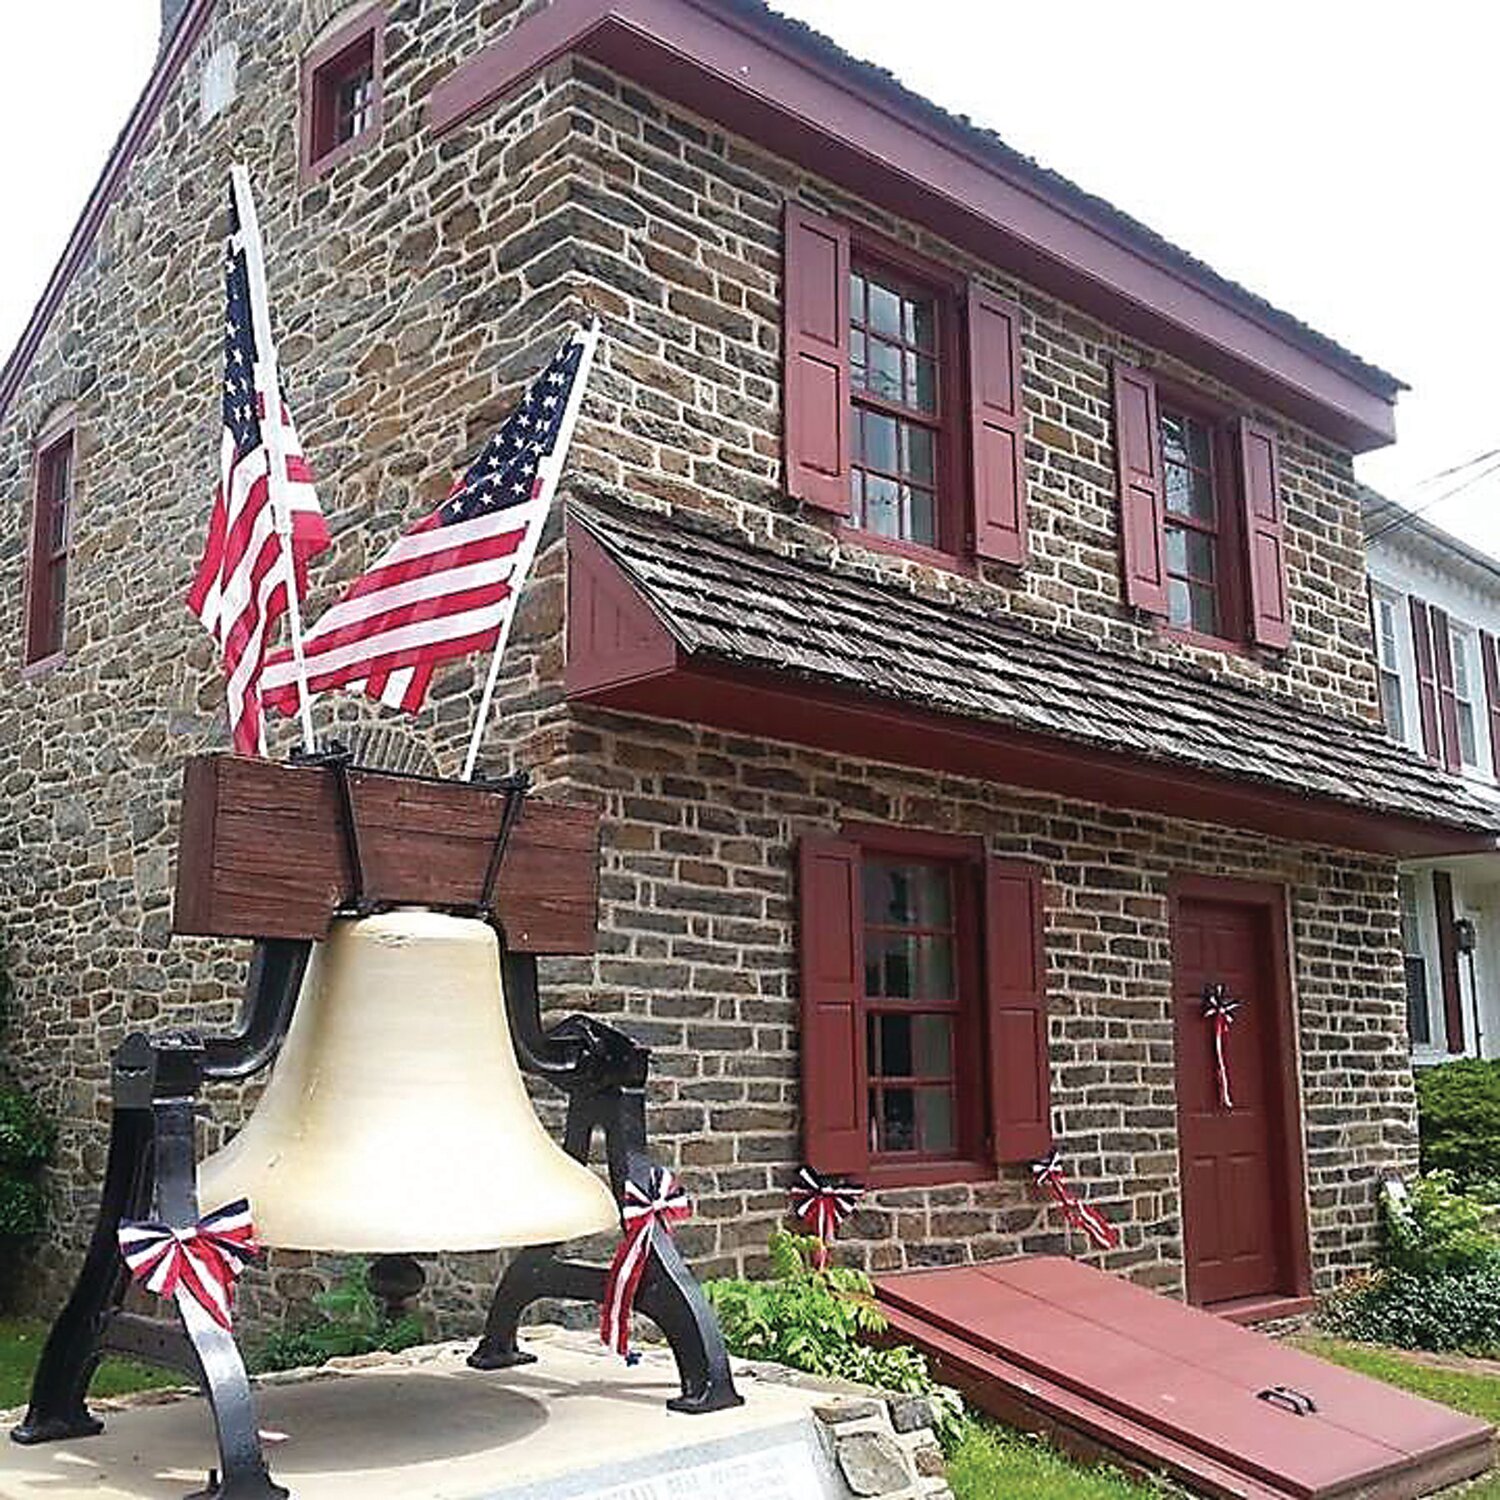 A replica of the Liberty Bell stands in front of Liberty Hall on West Broad Street in Quakertown.